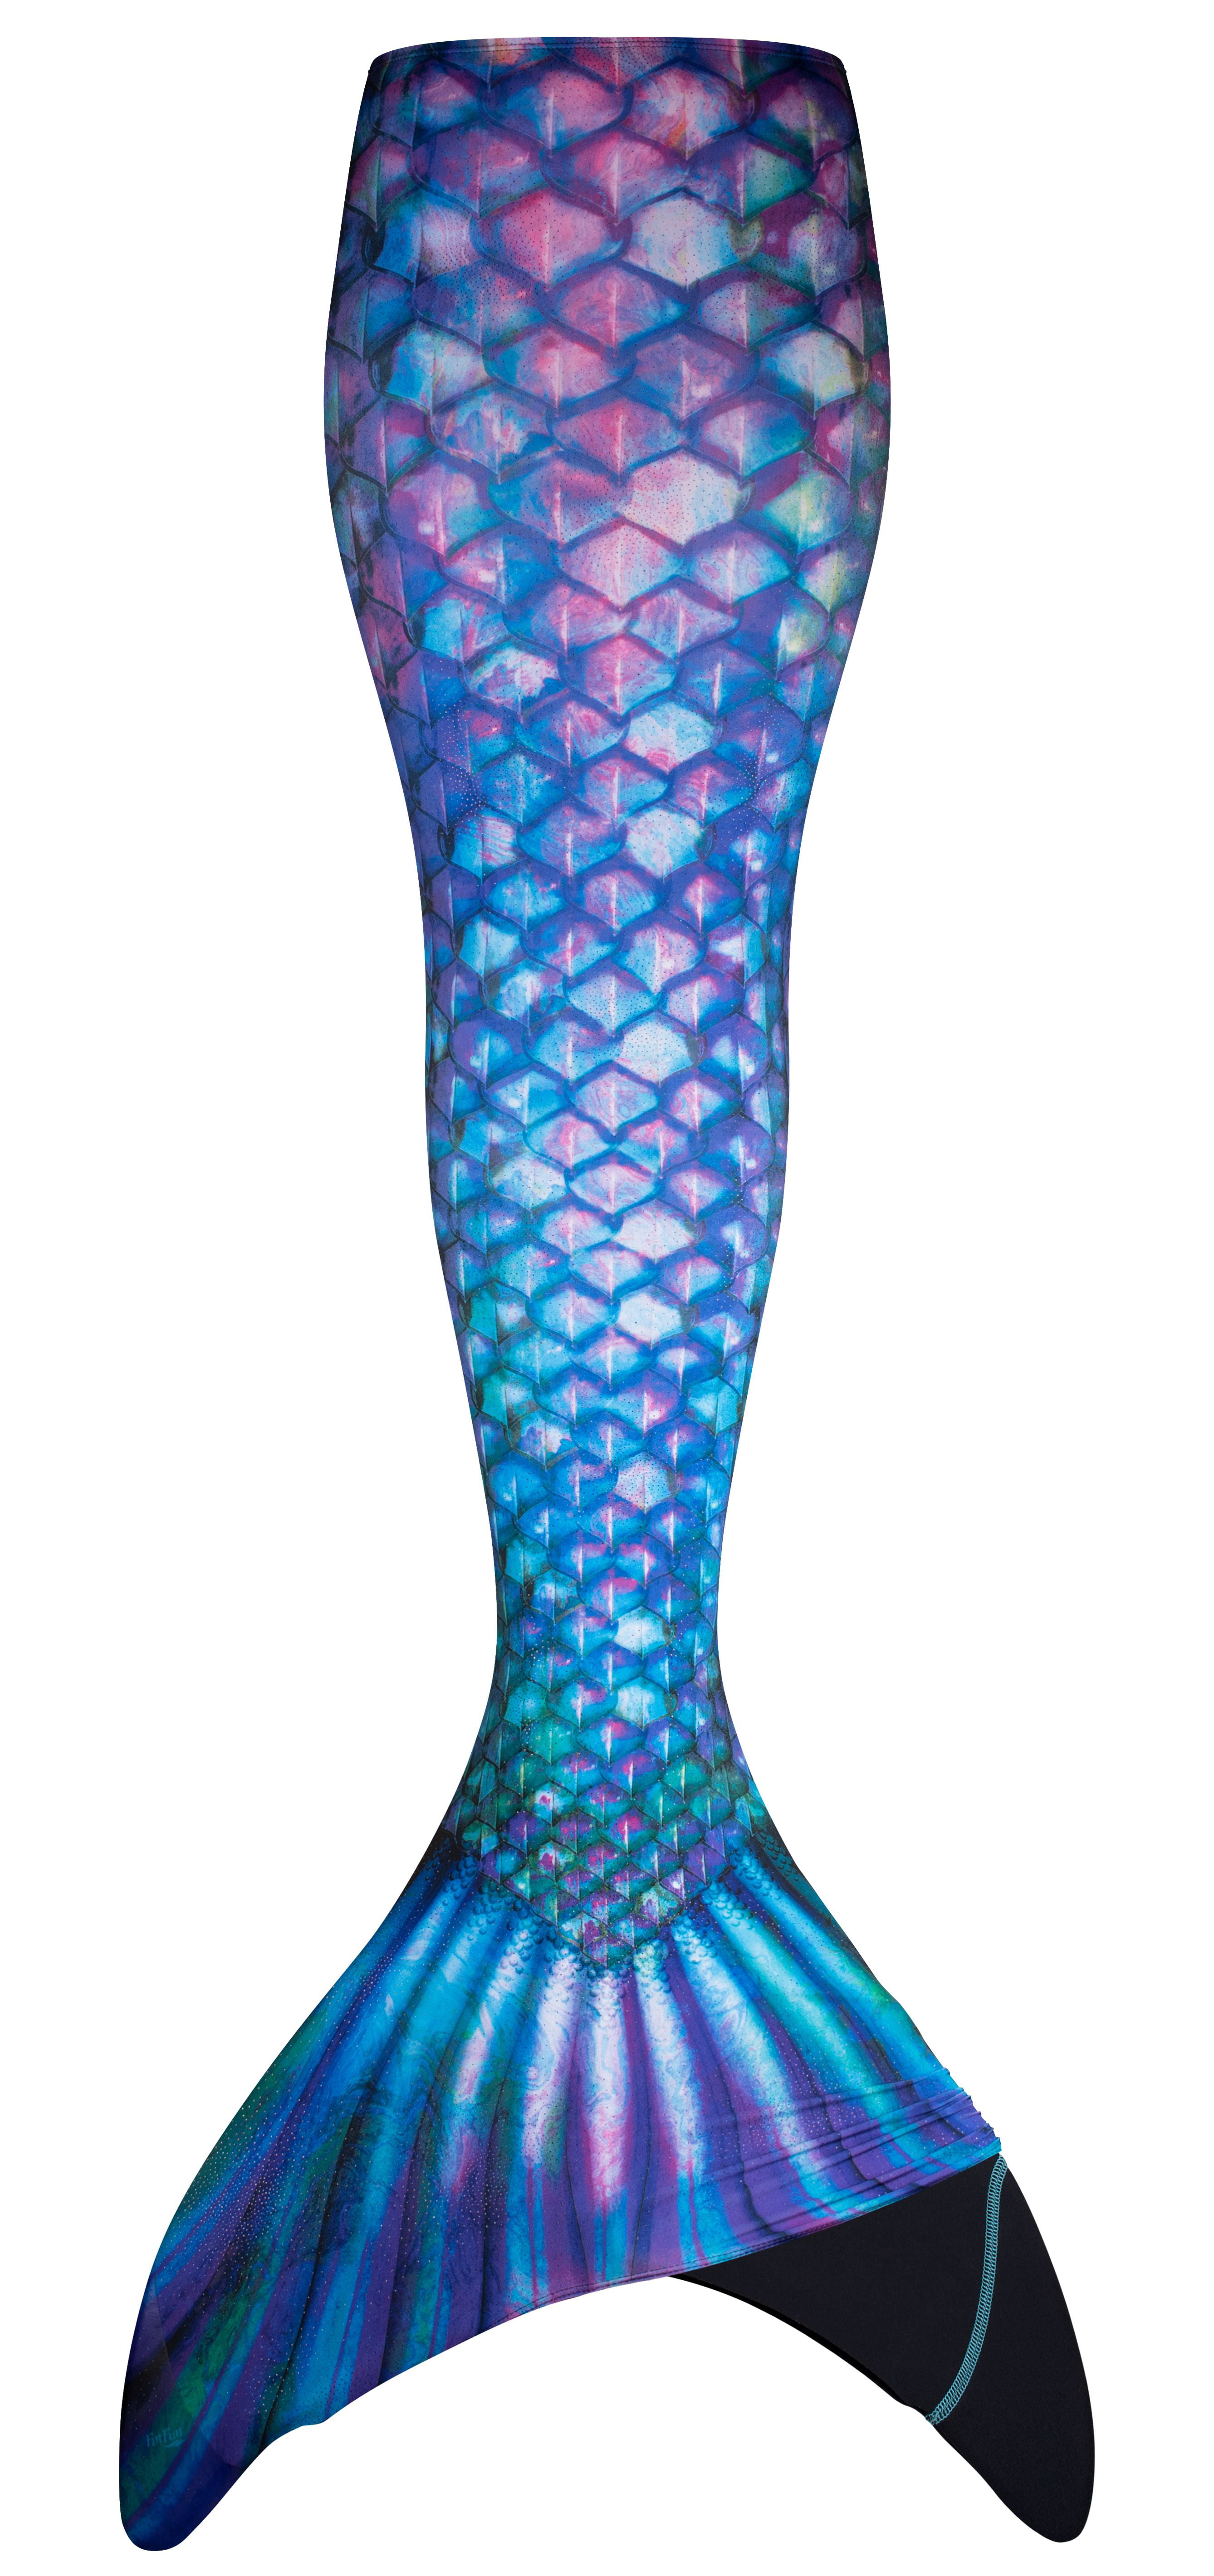 Limited Edition Fin Fun Mermaid Tails for Swimming with Monofin Kids and Adult Sizes 